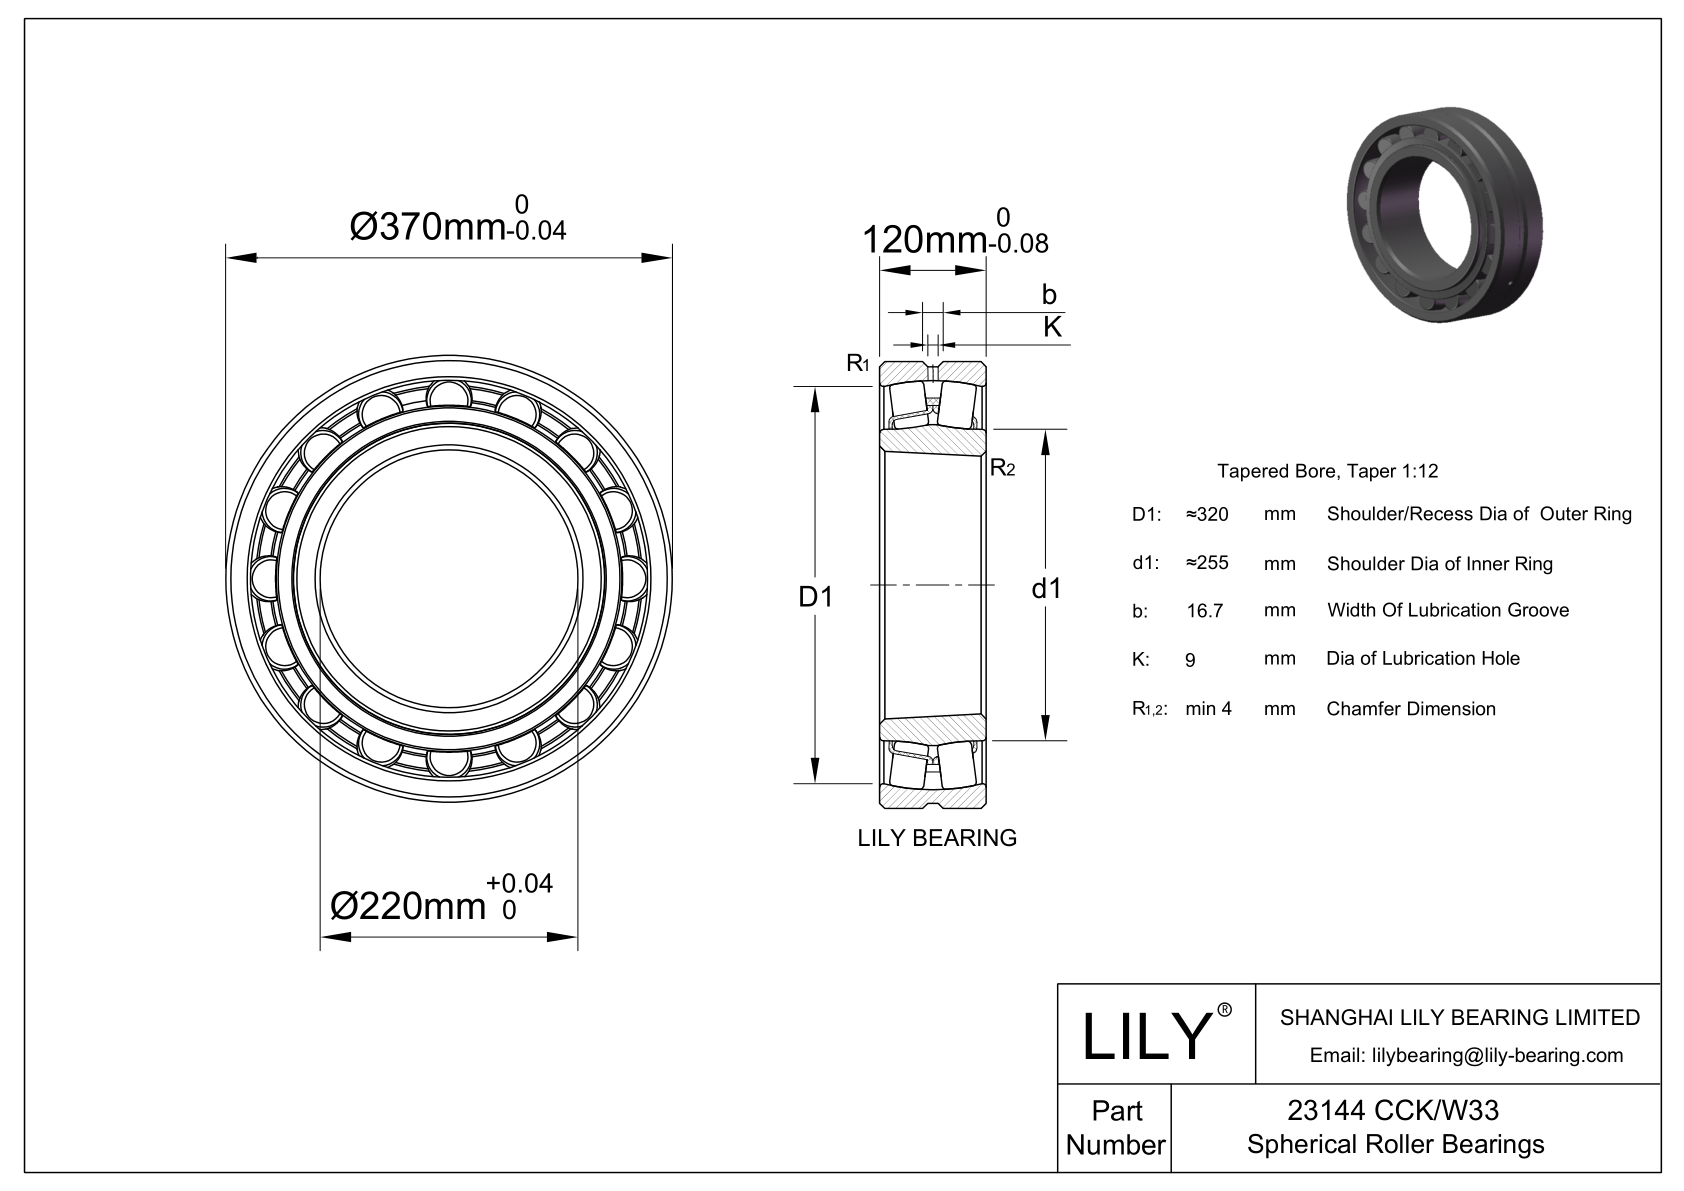 23144 CCK/W33 Double Row Spherical Roller Bearing cad drawing